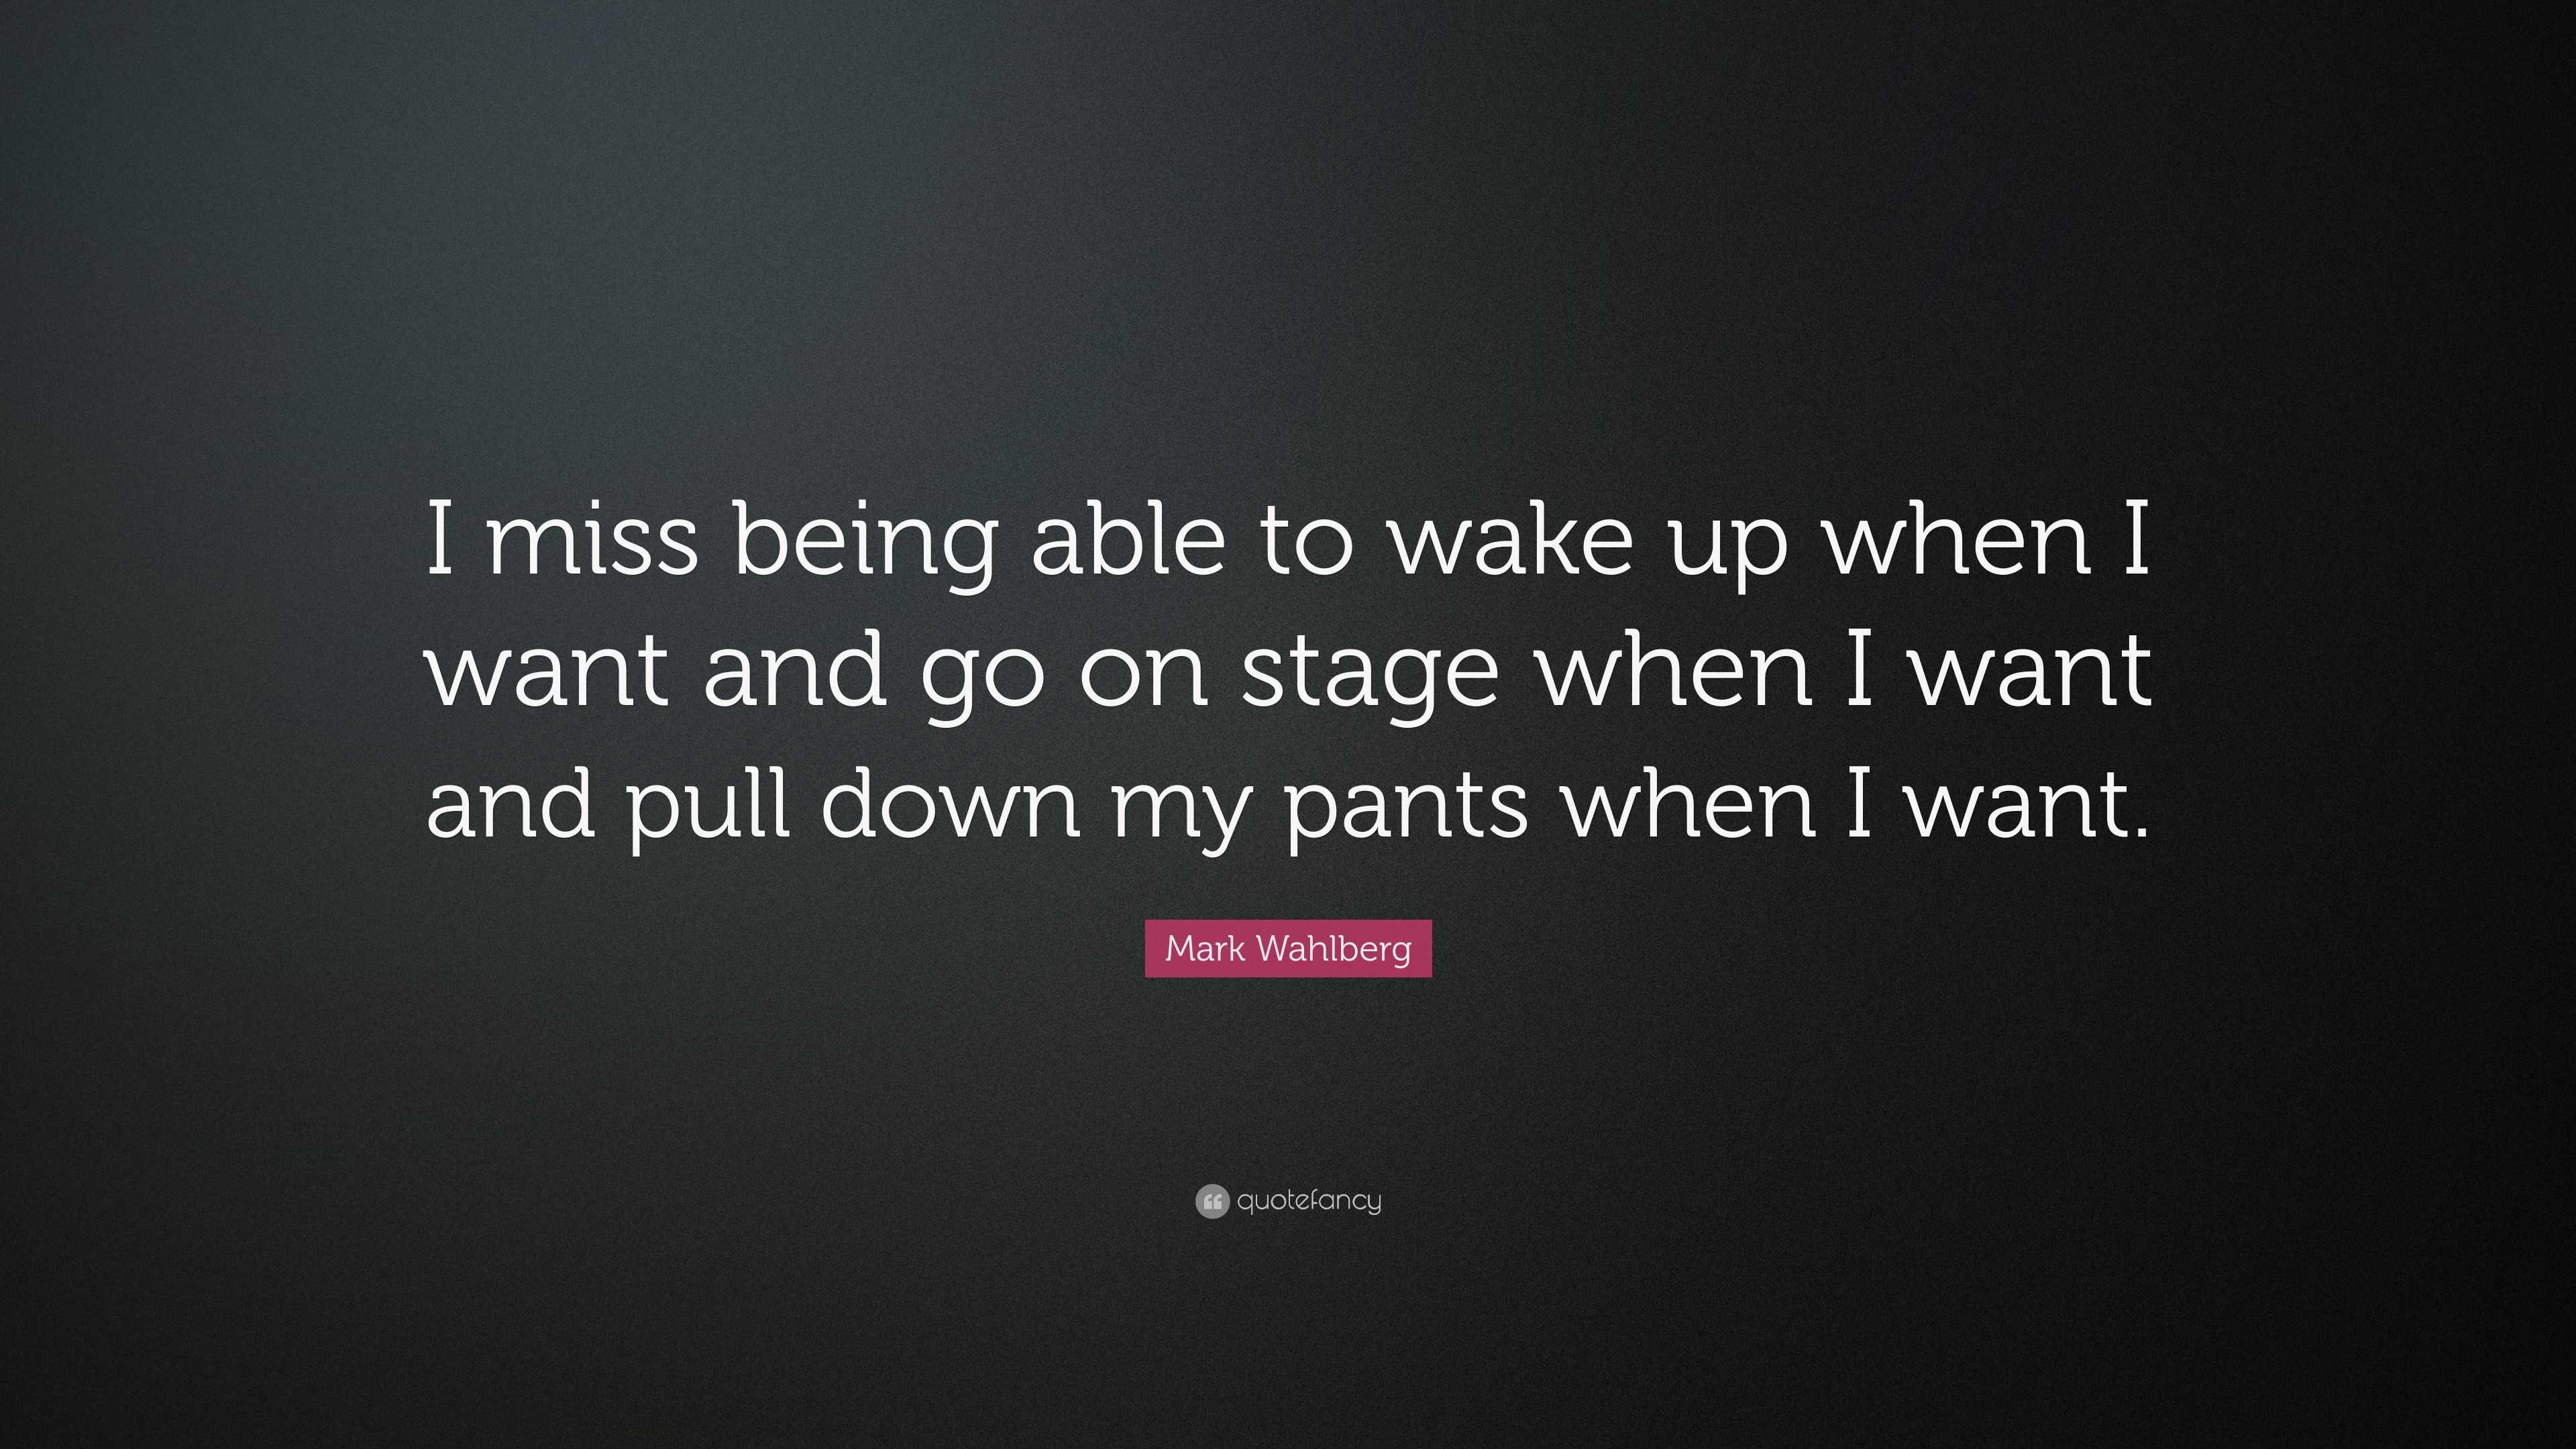 Mark Wahlberg Quote: “I miss being able to wake up when I want and go on